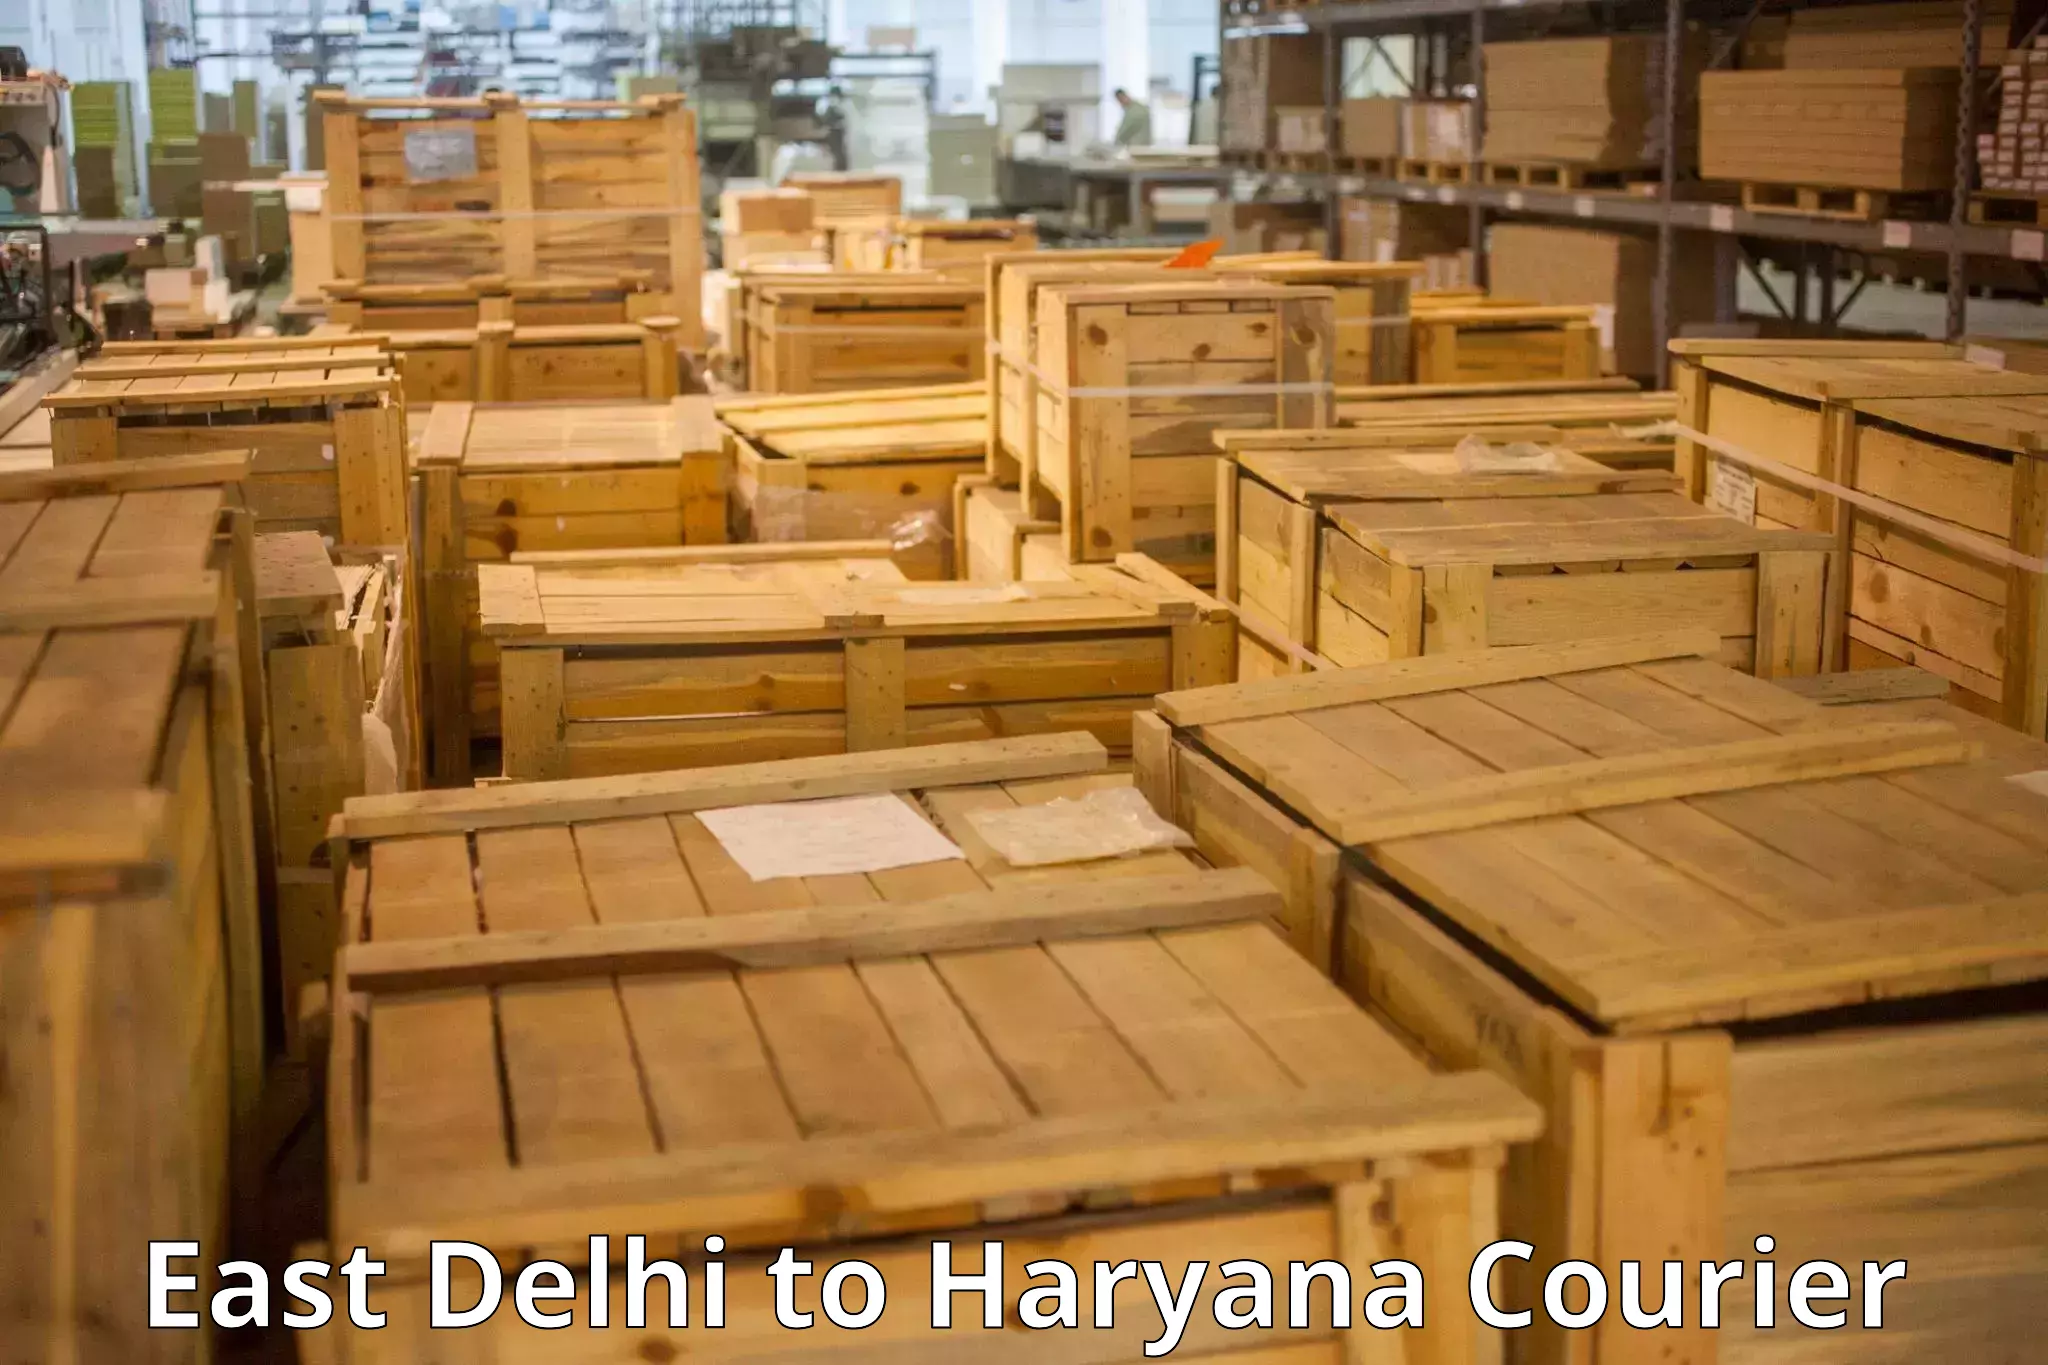 Luggage shipping planner East Delhi to NCR Haryana